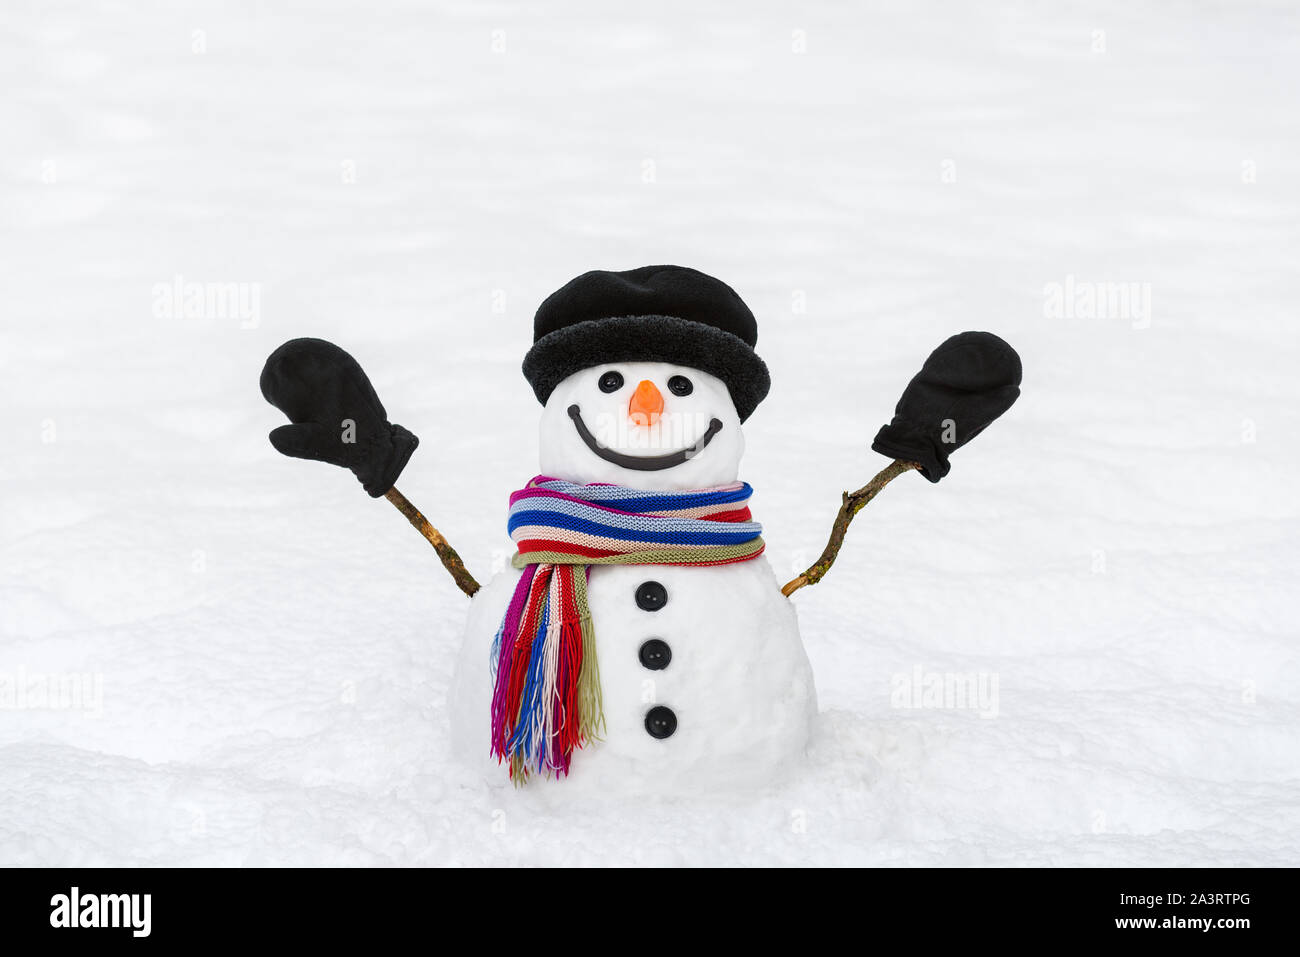 Cheerful snowman with mittens. New Year and Christmas card with a traditional winter character Stock Photo